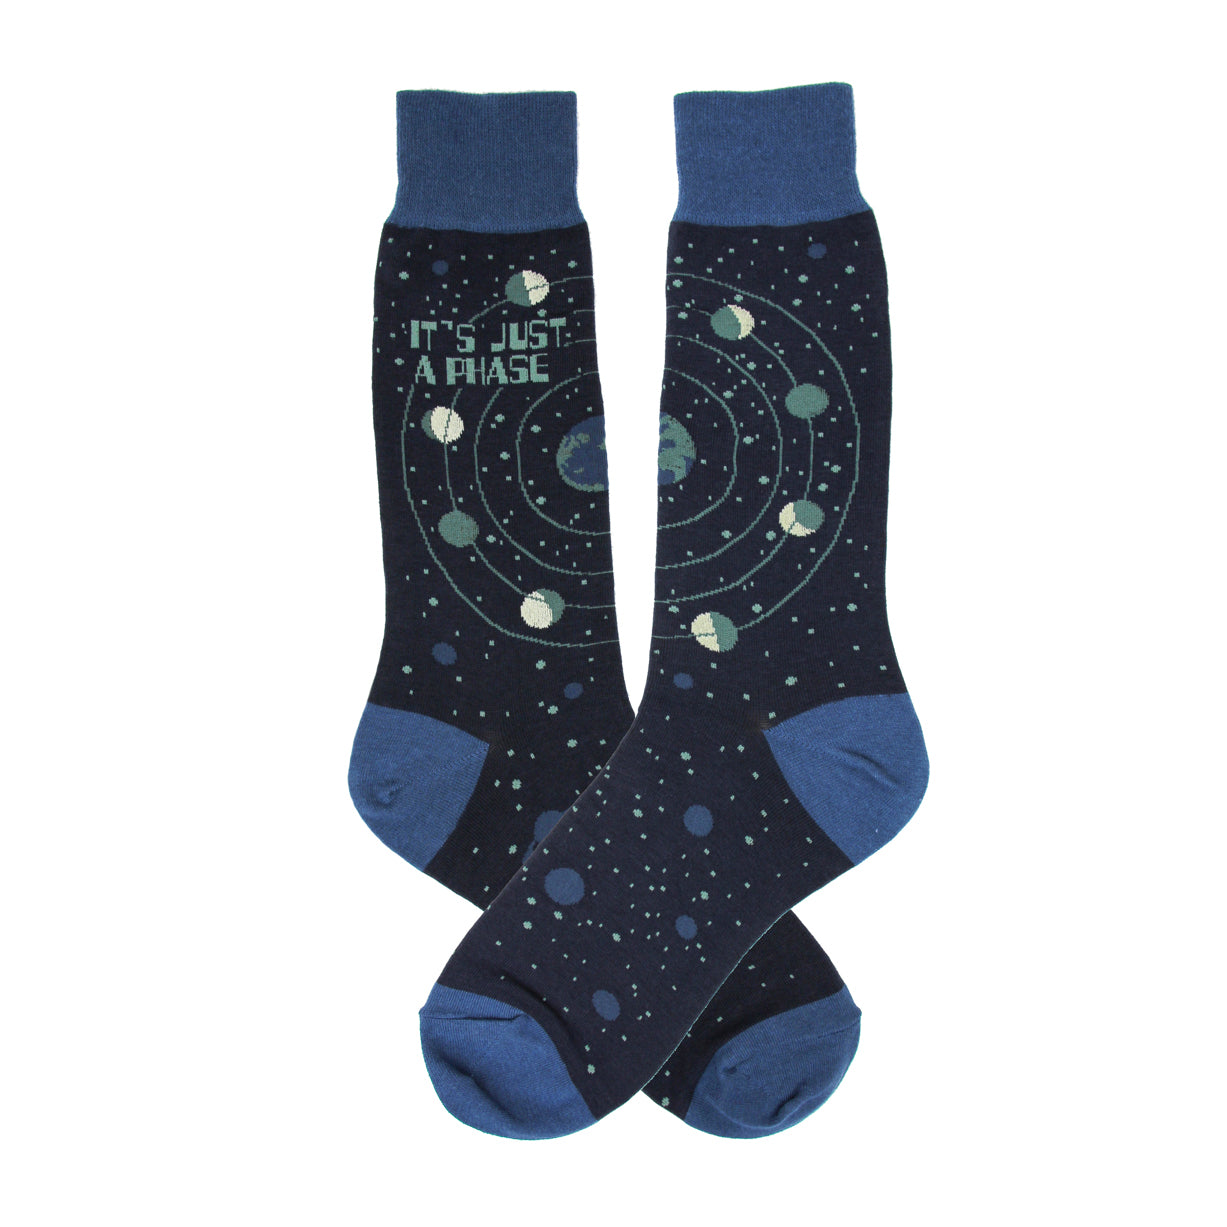 It's Just A Phase Men's Crew Socks